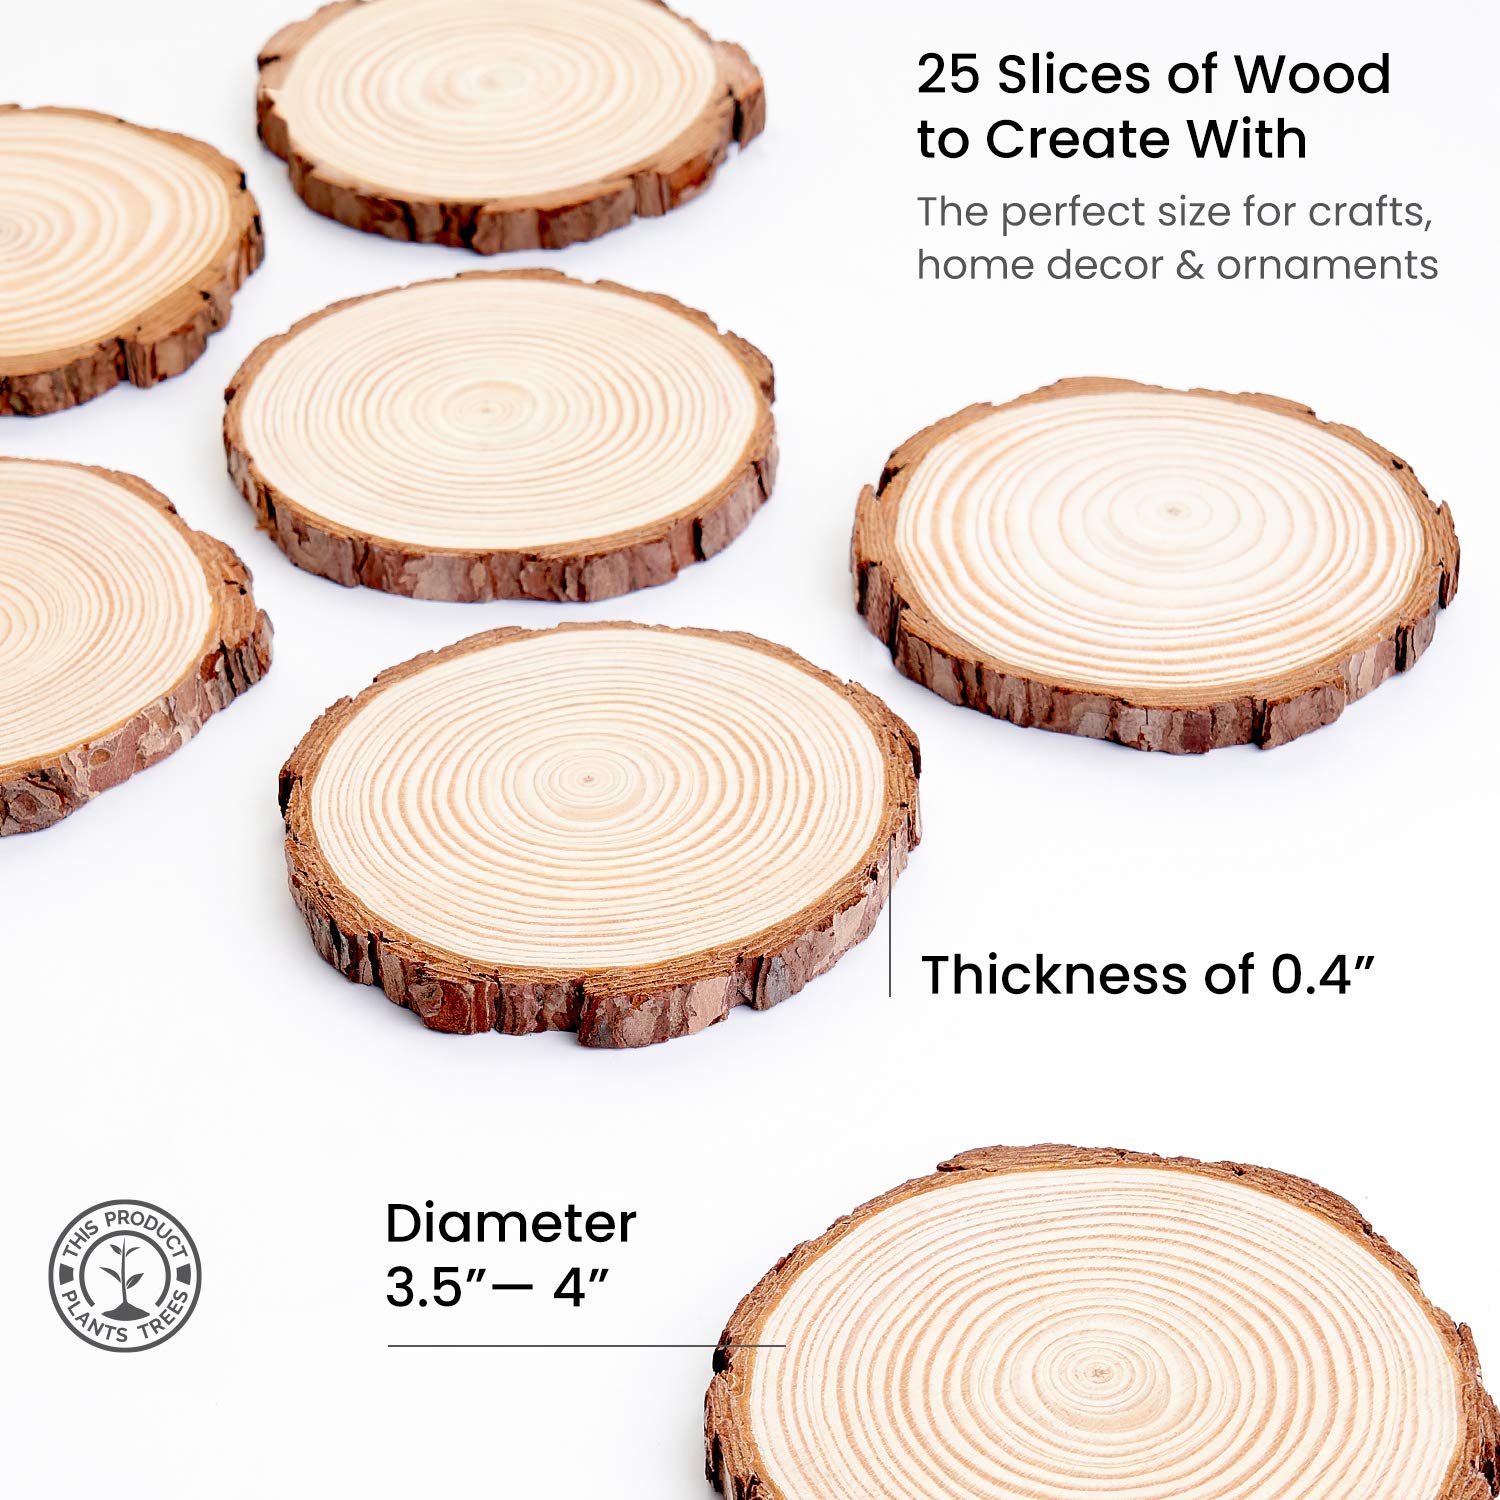 ARTEZA Natural Wood Slices,25 Pieces,9-10cm Diameter,1cm Thickness,Round Wood Discs for Crafts,Centerpieces & Paintings,Christmas Ornaments,Sanded & Polished Circles